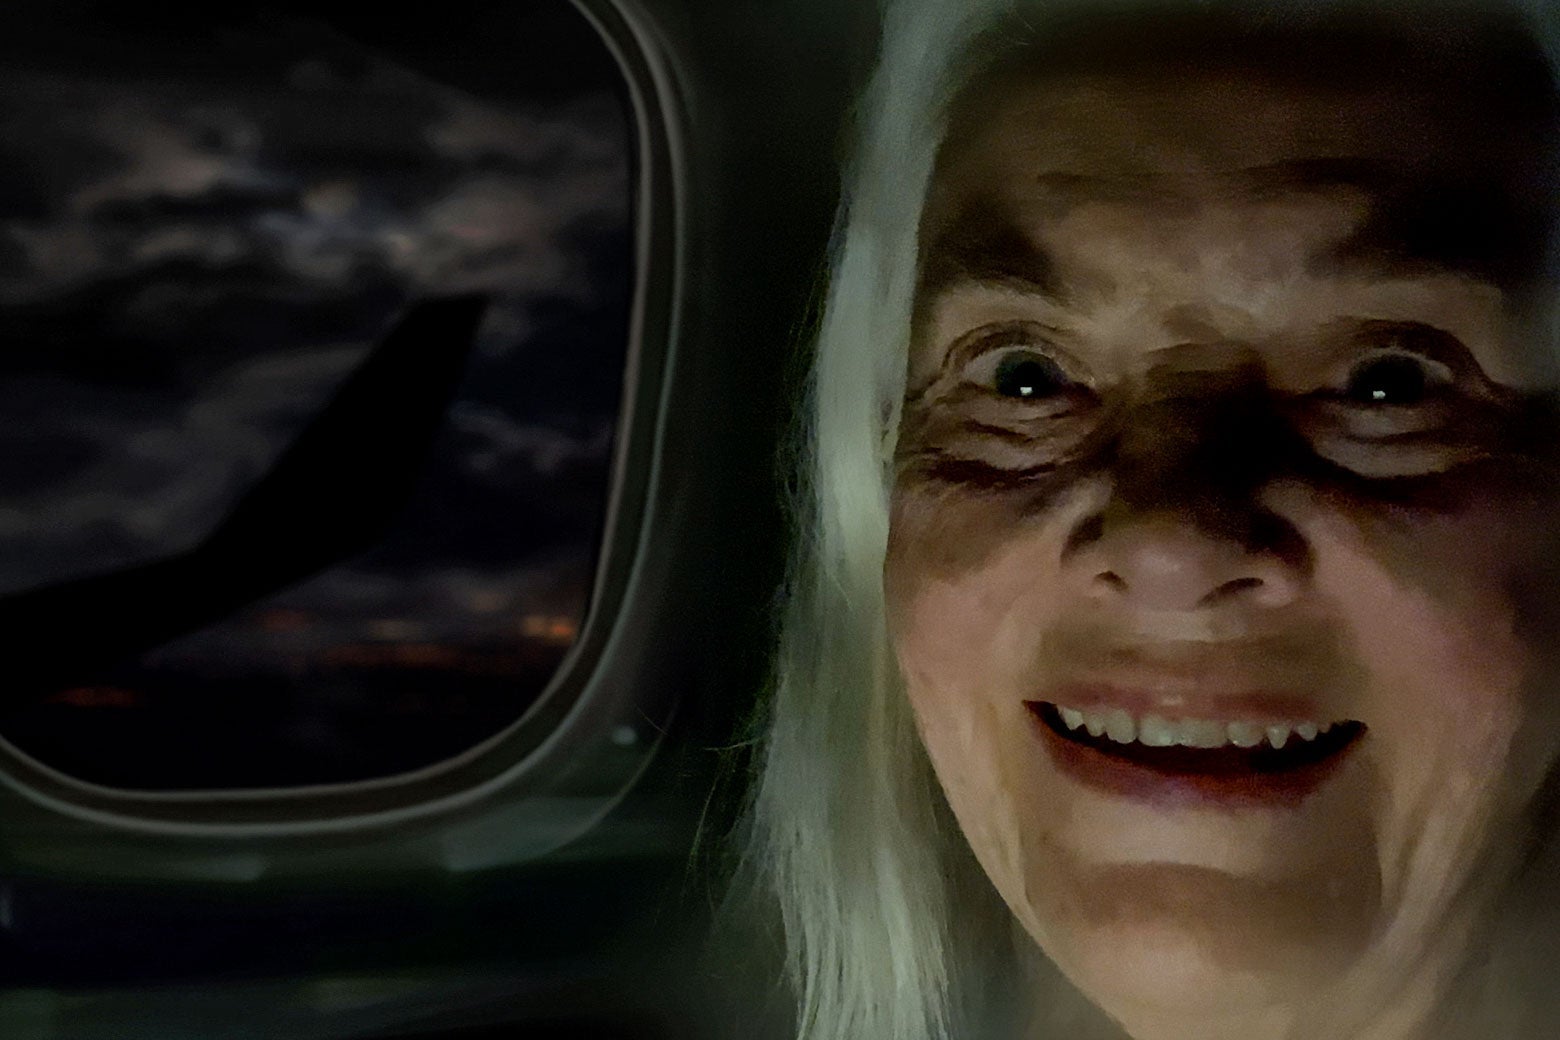 Lois Smith in front of a drawing of an airplane window.